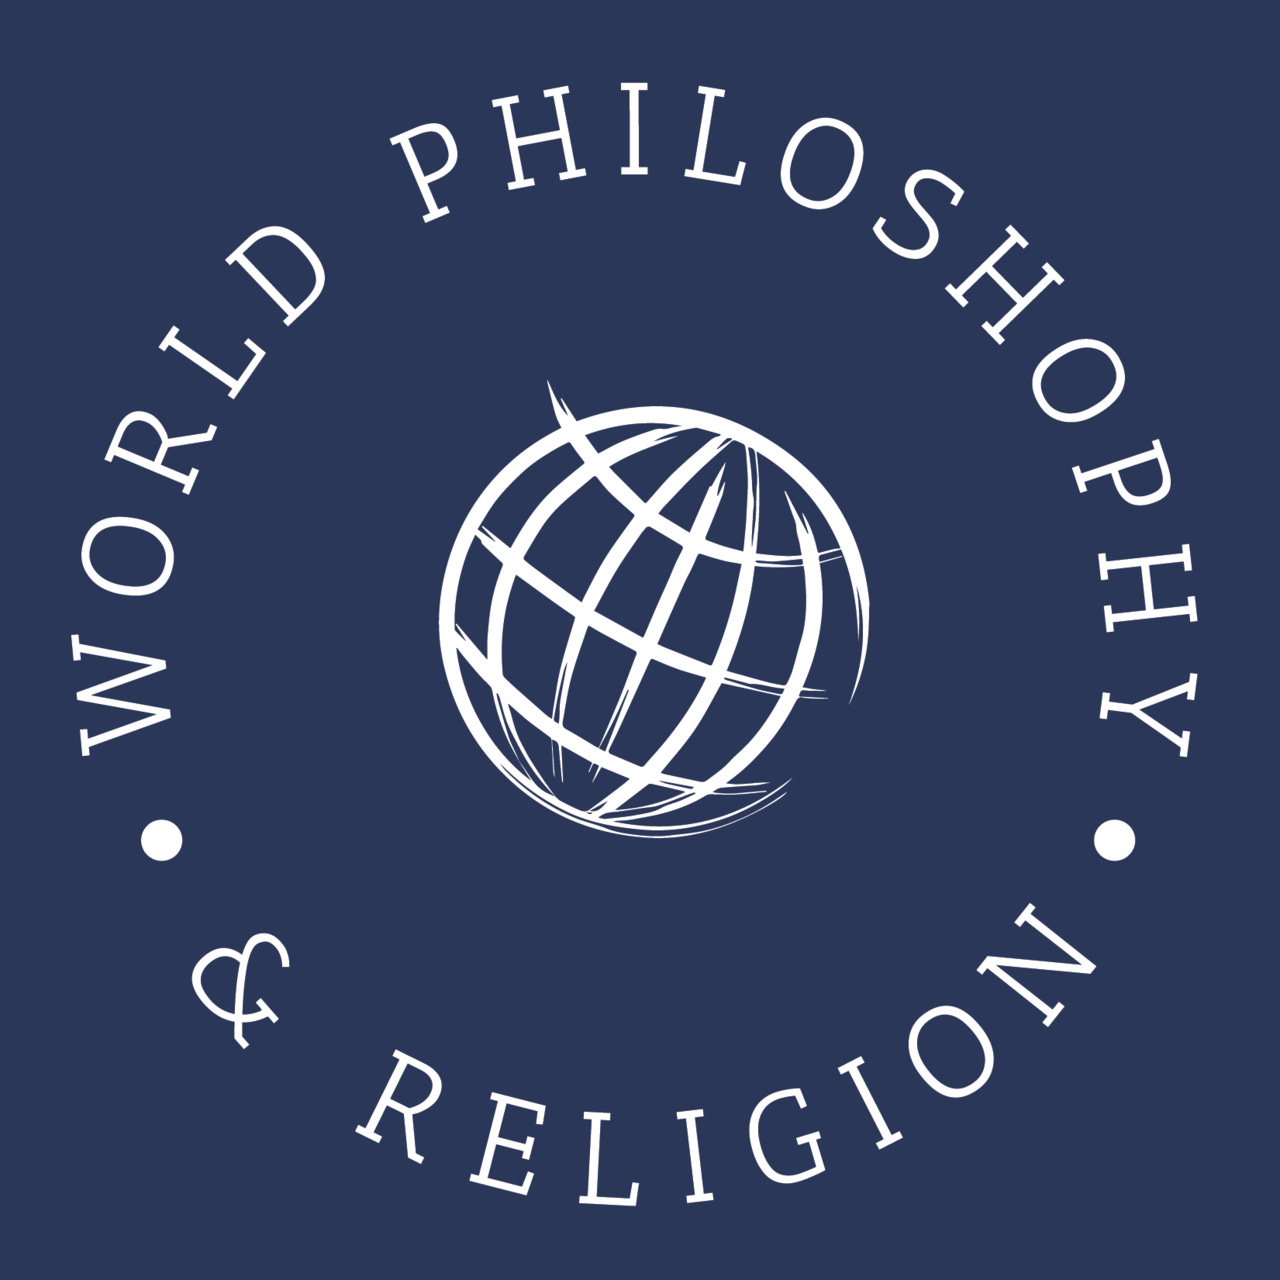 The Center for World Philosophy and Religion